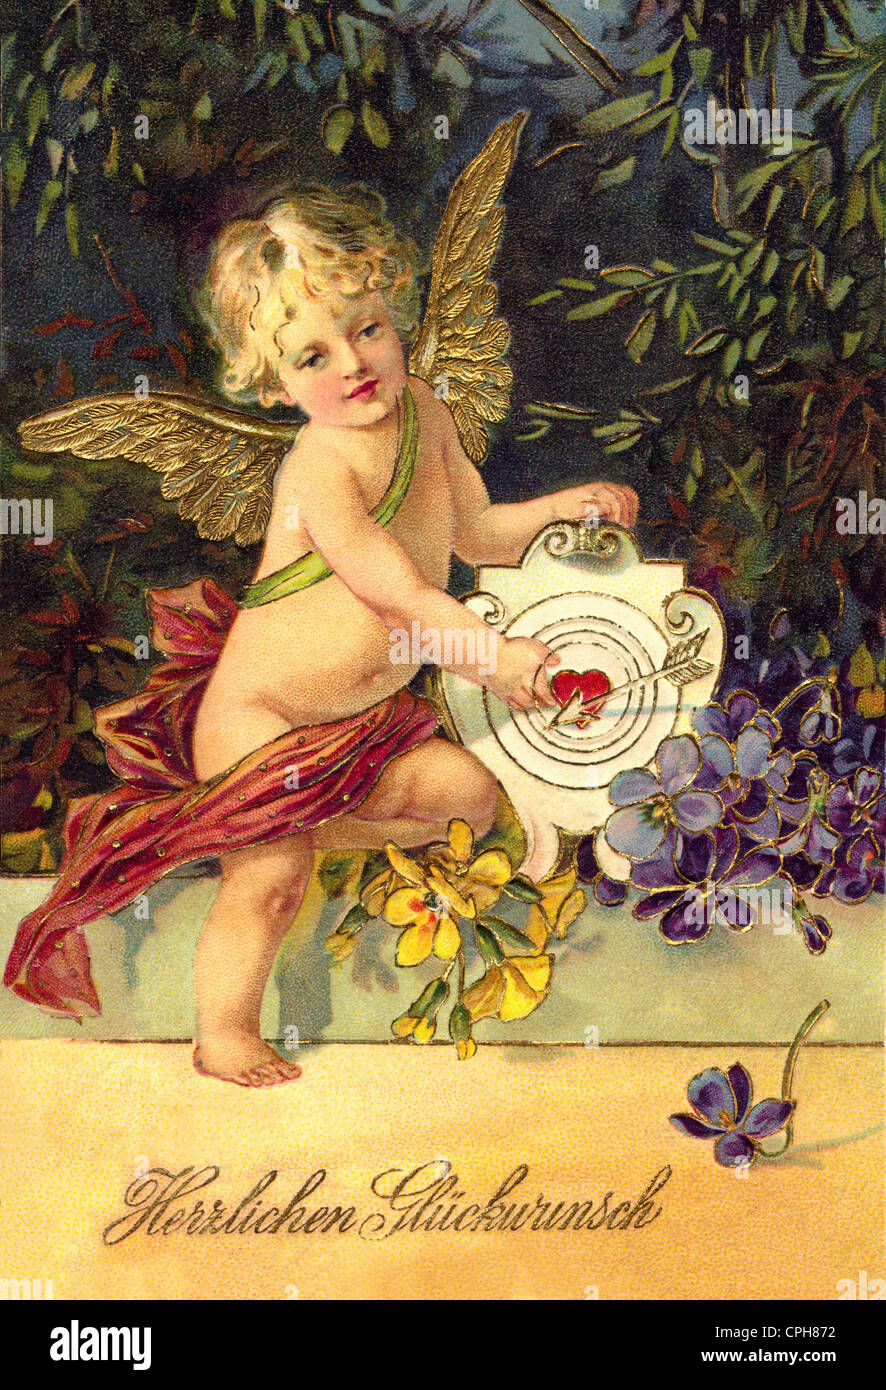 kitsch, Cupid with arrow and target, greetings card, Germany, 1908, Additional-Rights-Clearences-Not Available Stock Photo